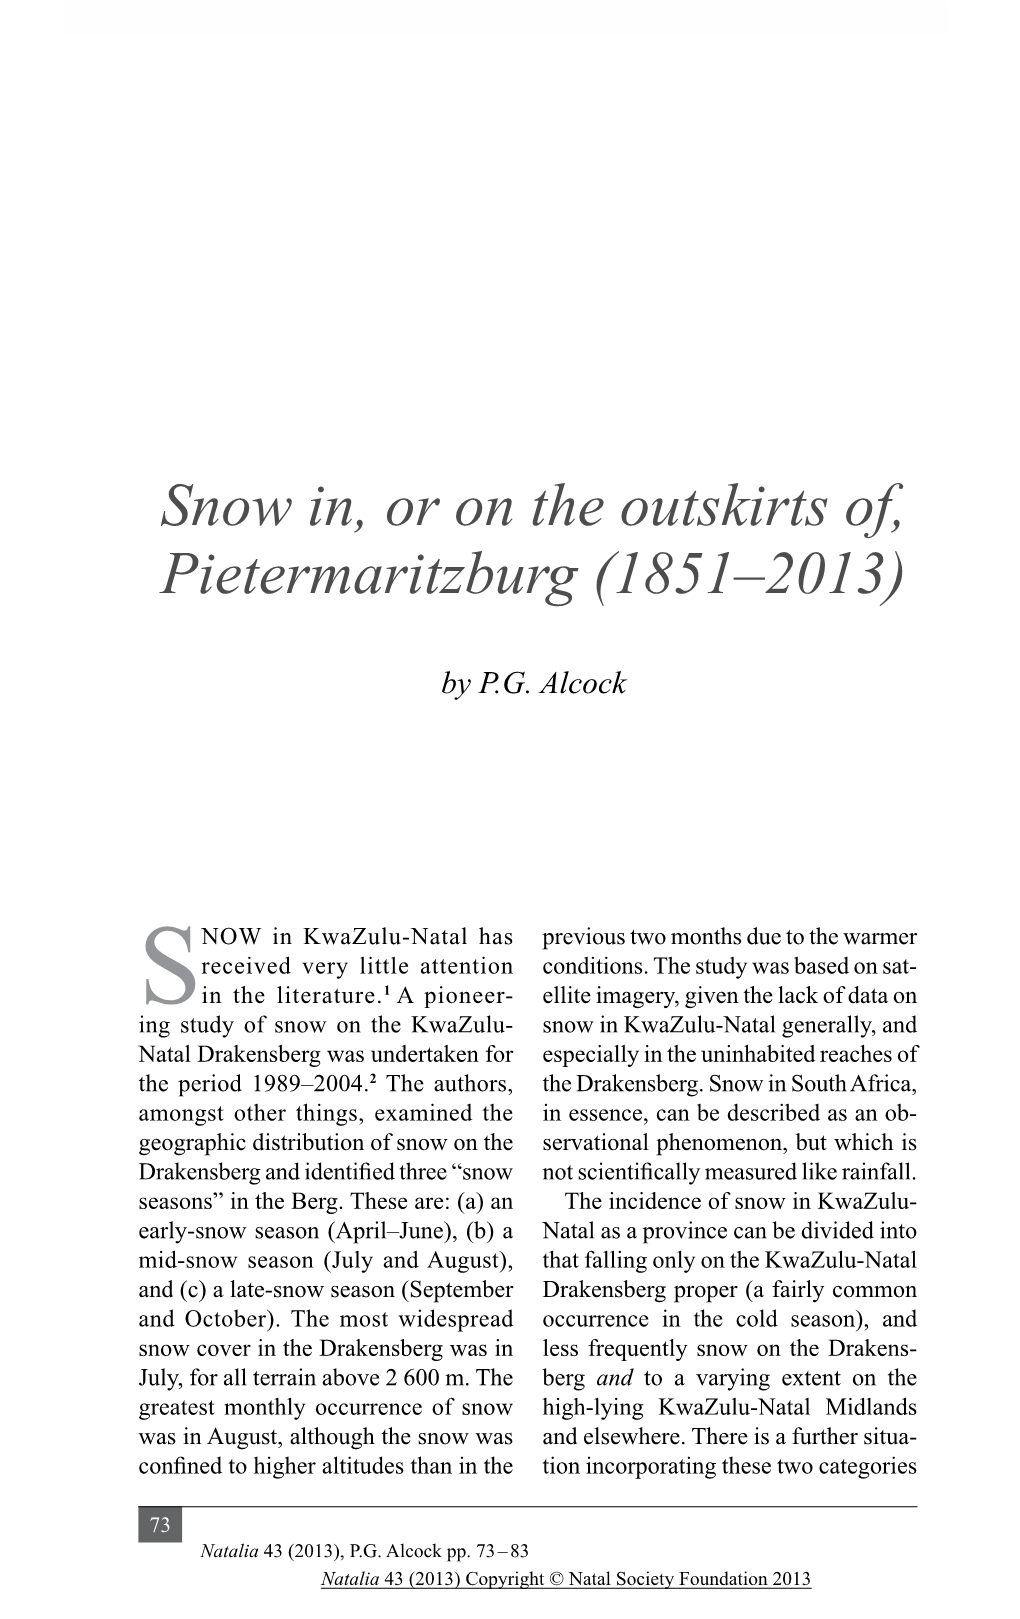 Snow In, Or on the Outskirts Of, Pietermaritzburg (1851–2013)